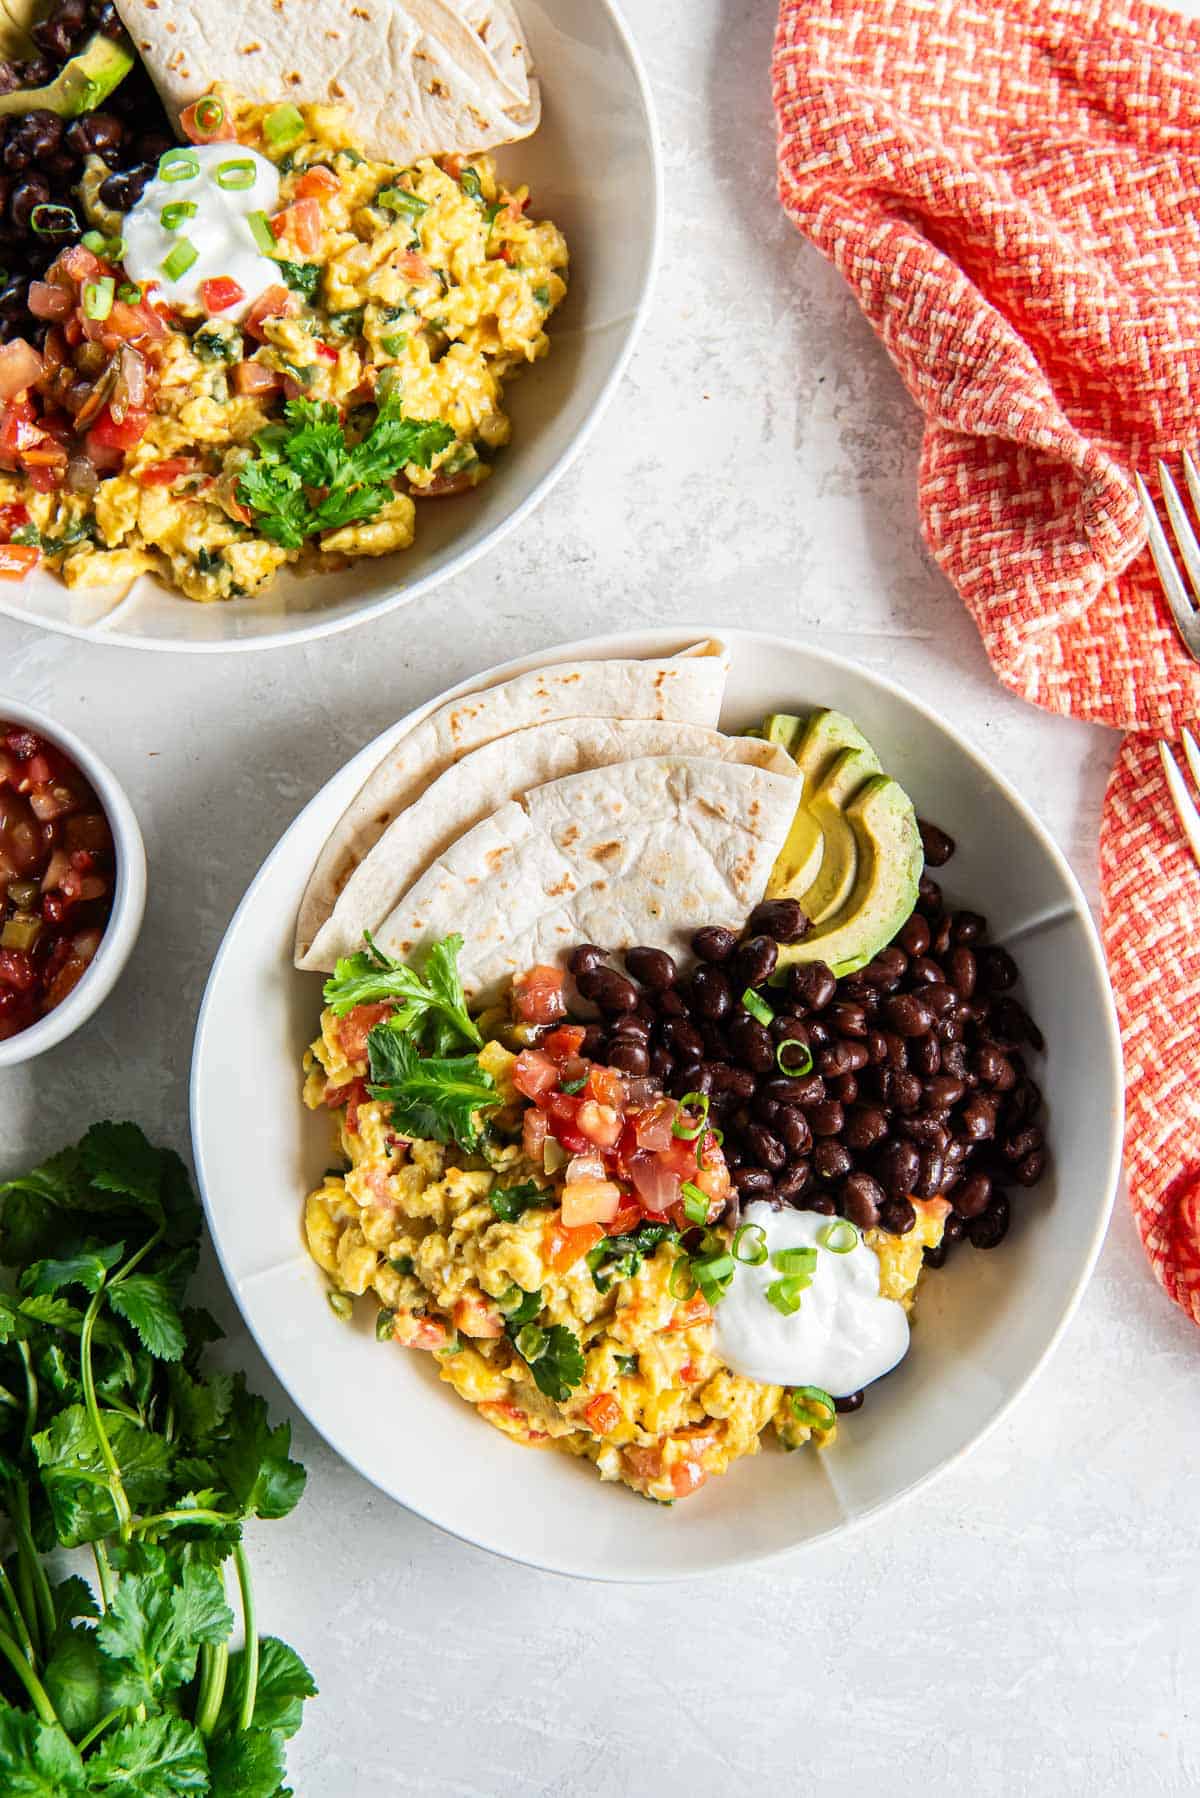 Two bowls filled with Mexican scrambled eggs, black beans, sliced avocado, and flour tortillas.